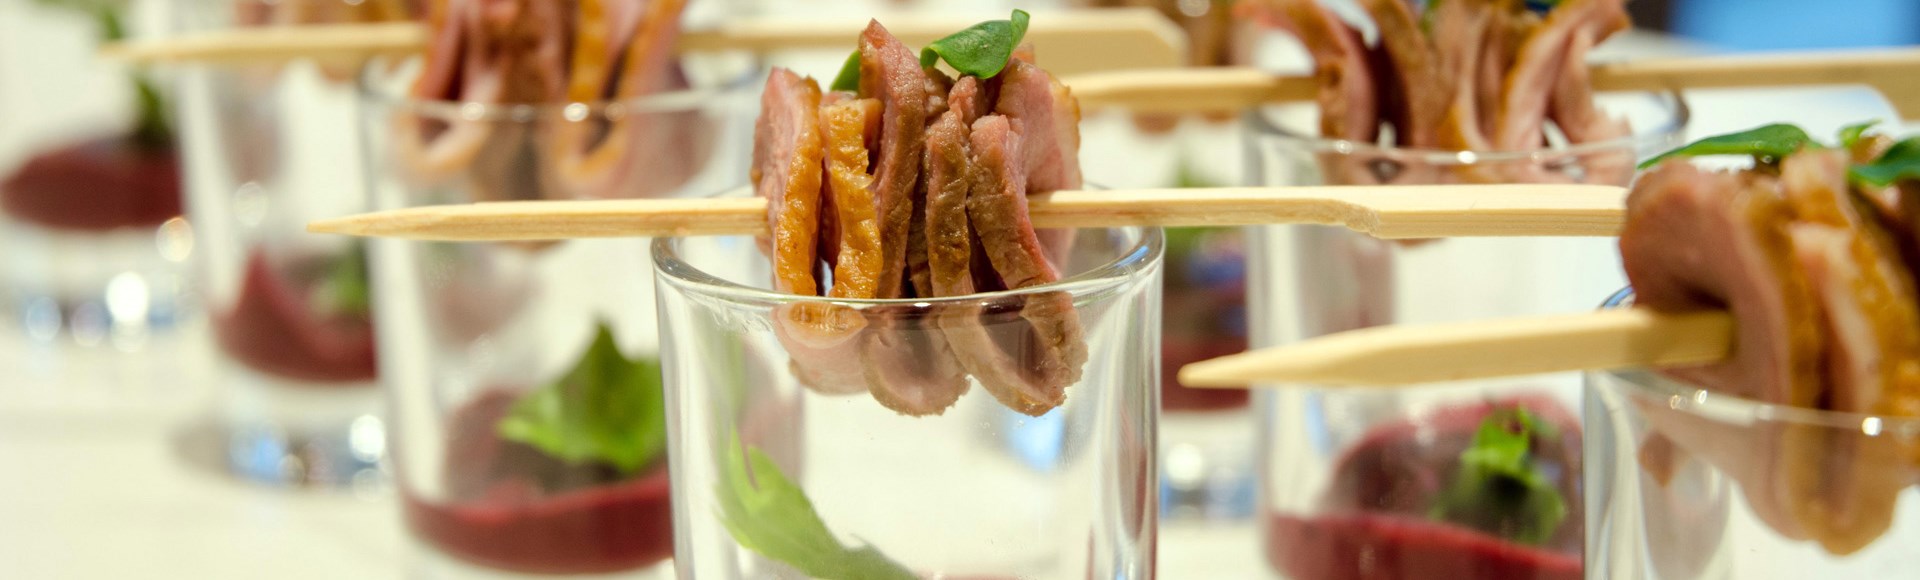 canap-with-smoked-duck-breast-raspberry-and-horseradish-sauce-and-baby-rocket - Alargo Private Chef Services | Corfu Island - Greece